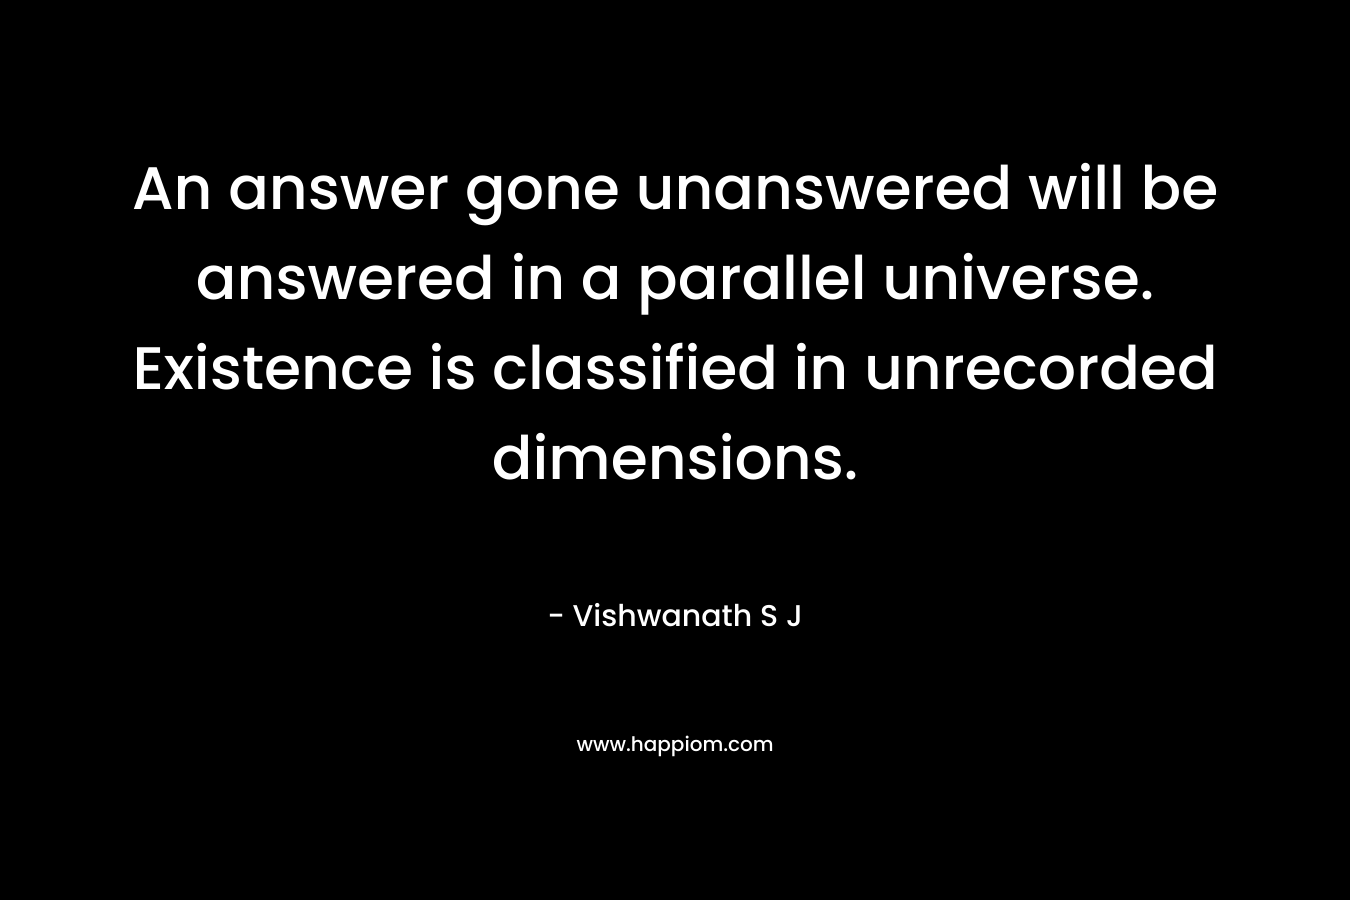 An answer gone unanswered will be answered in a parallel universe. Existence is classified in unrecorded dimensions. – Vishwanath S J